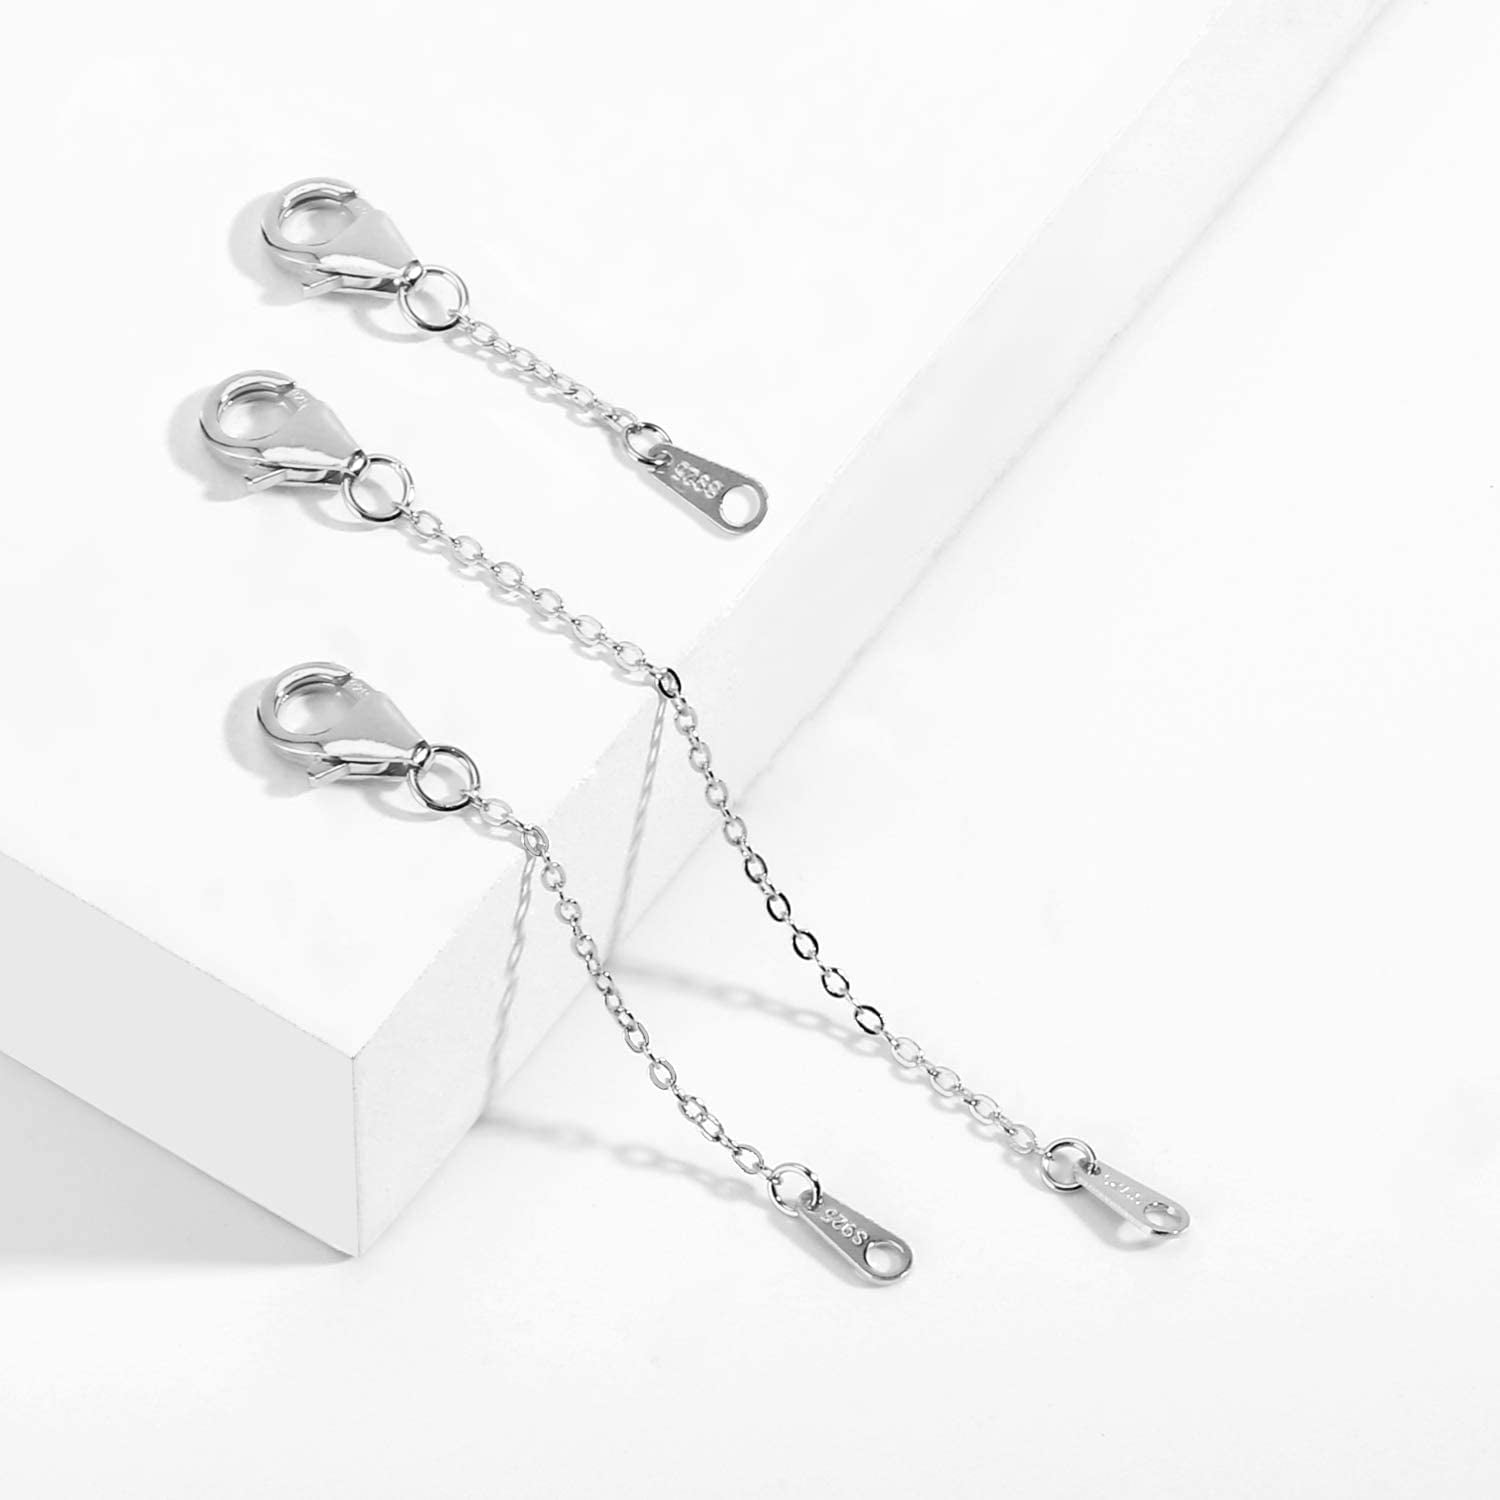  JIACHARMED Bracelet Extenders, Silver Necklace Extenders  Delicate 1,2,3 Inches Necklace Extension Chain Set for Necklaces Choker  Bracelet Anklet, 2mm Width Chain Extender : Clothing, Shoes & Jewelry